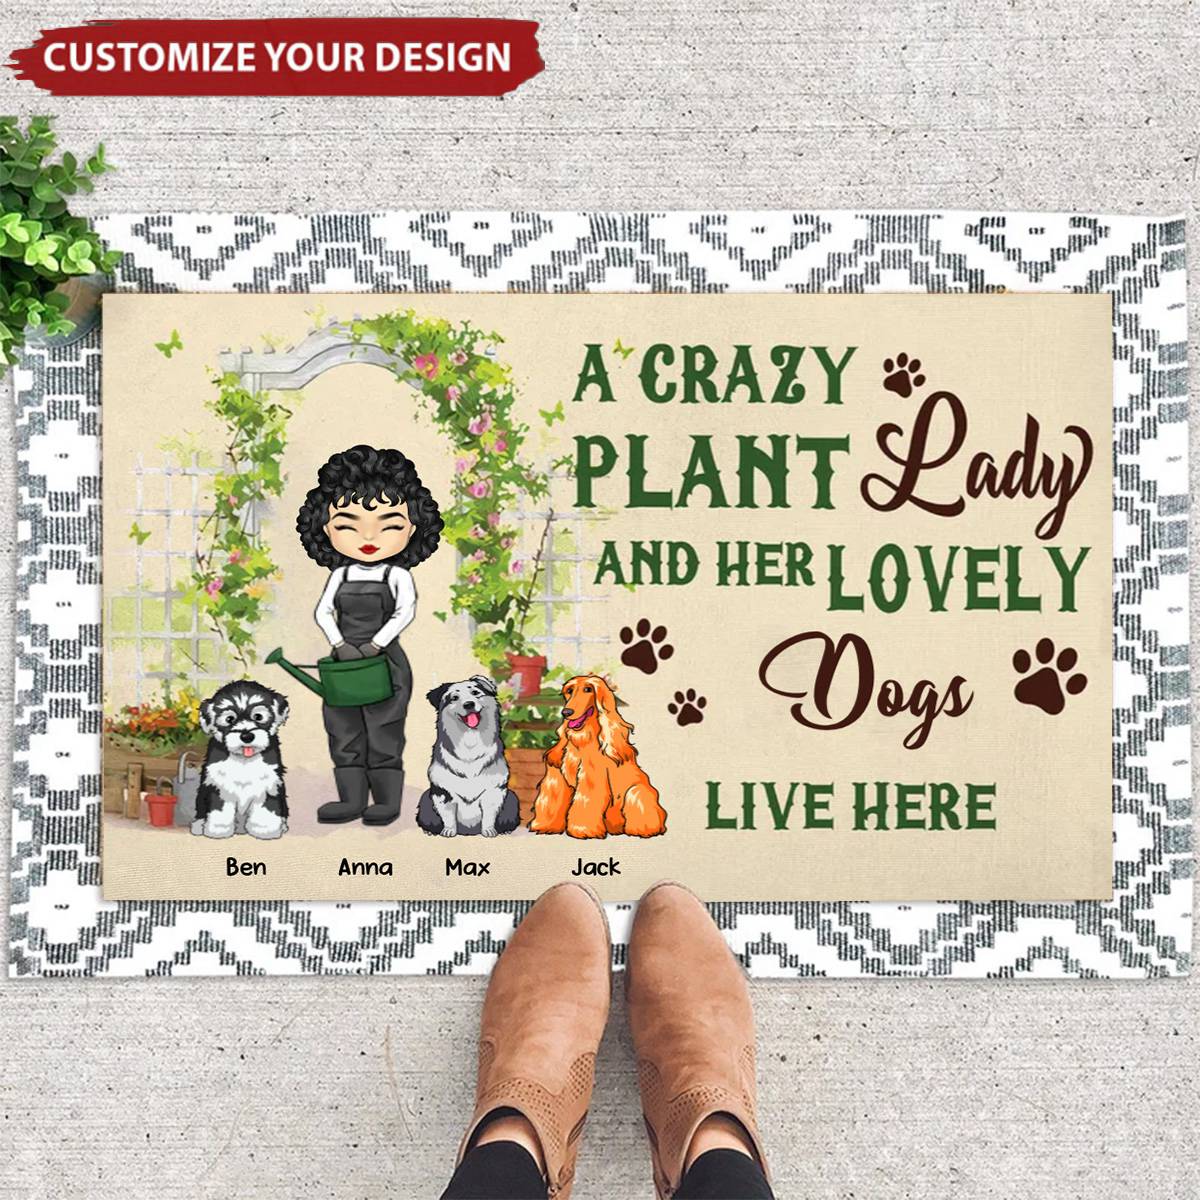 A Crazy Plant Lady And Her Lovely Dogs Live Here - Personalized Doormat